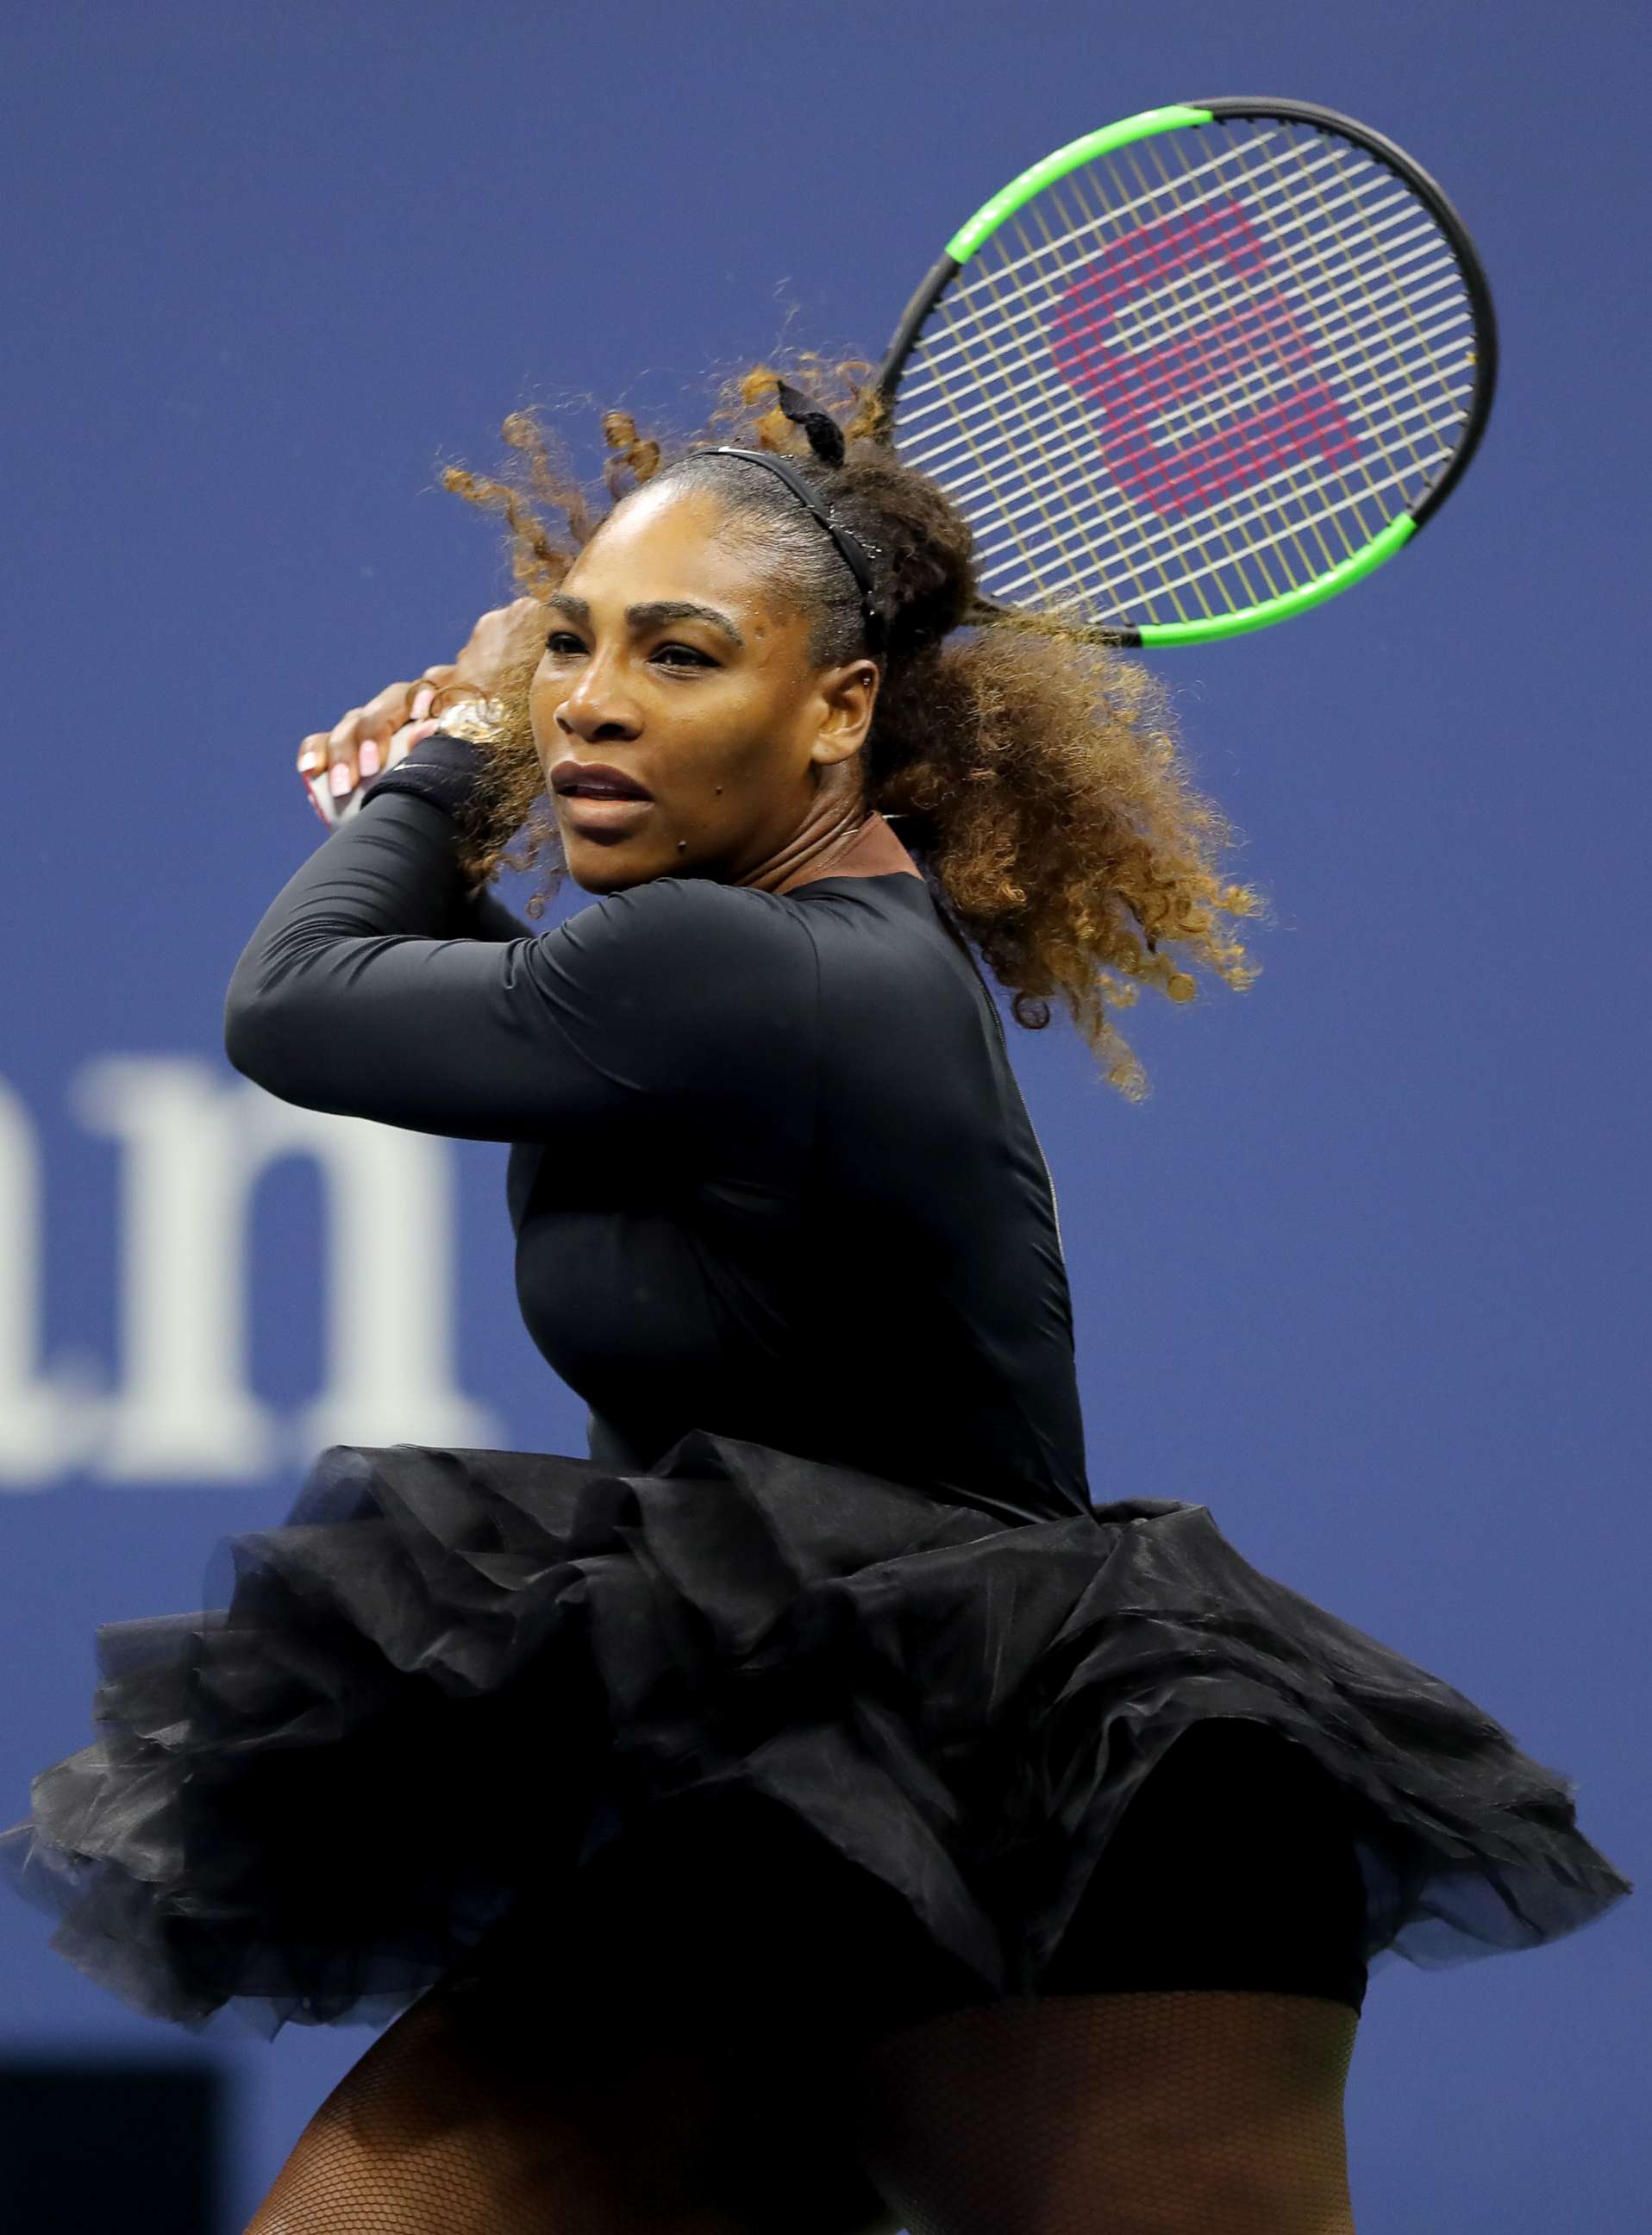 PHOTO: Serena Williams of the United States returns the ball during her Women's Singles finals match against Naomi Osaka of Japan on Day Thirteen of the 2018 US Open, Sept. 8, 2018, in New York.